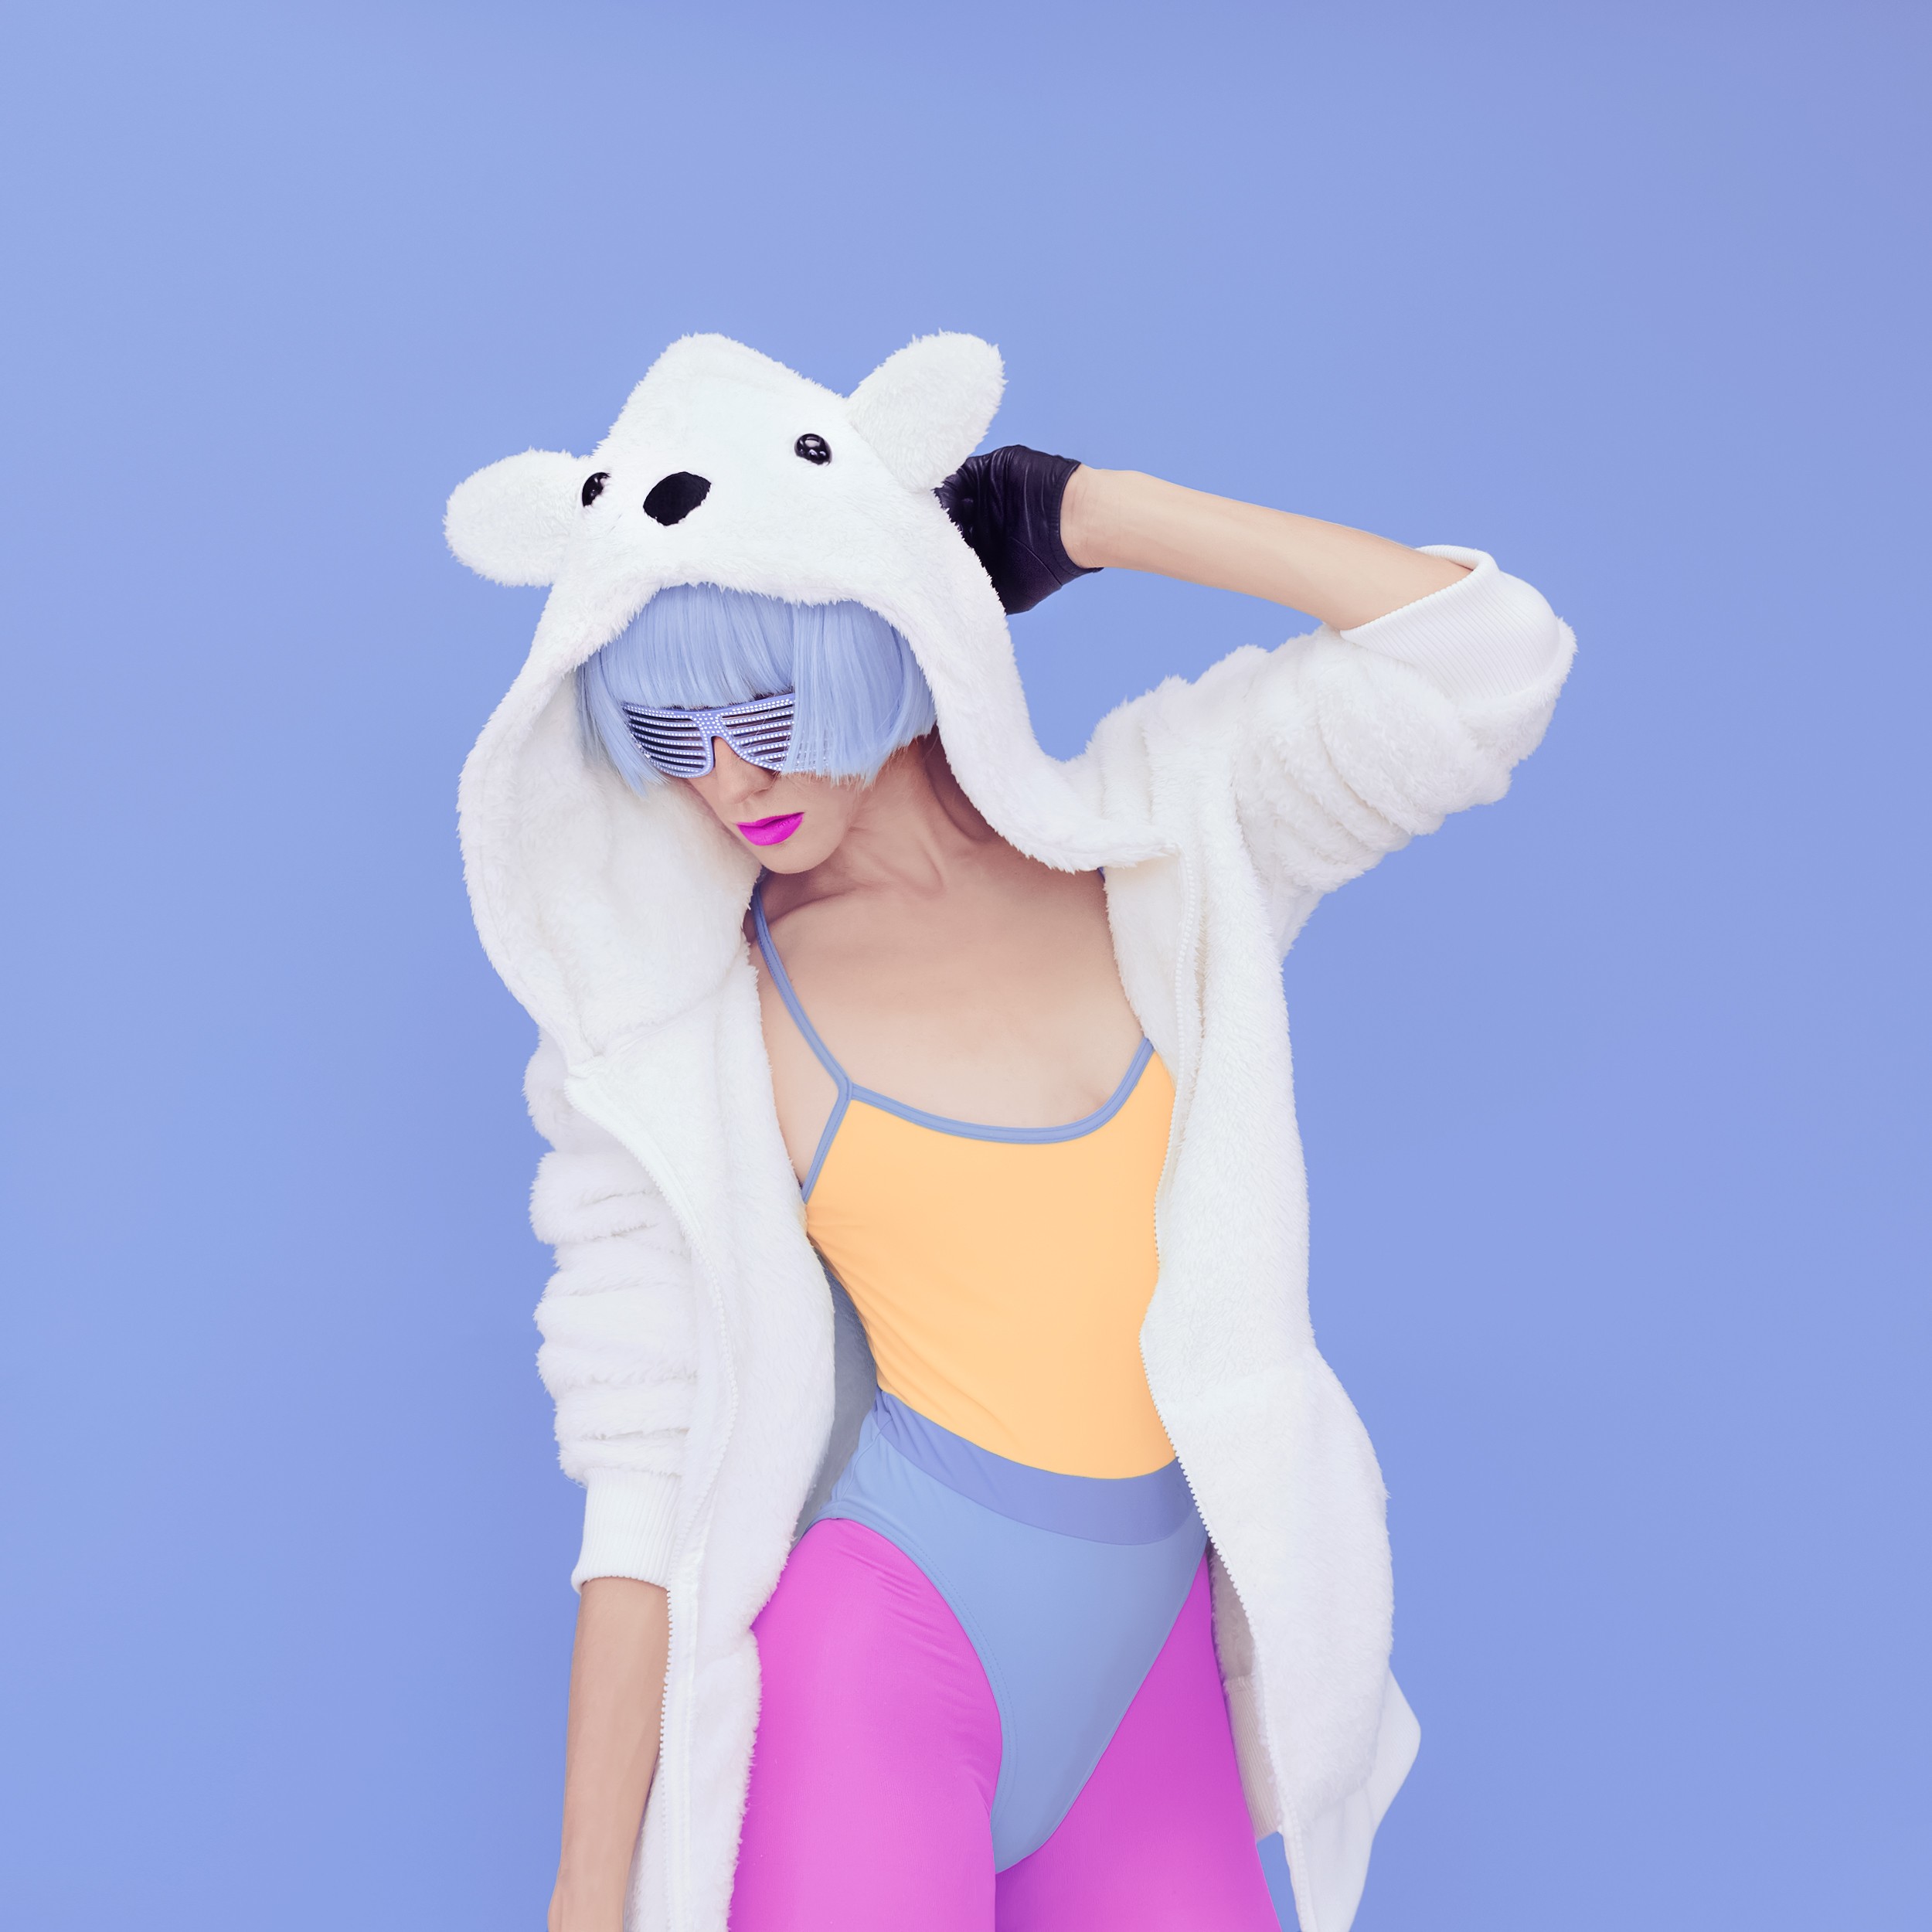 crazy girl in hoodie Teddy Bear on a blue background.